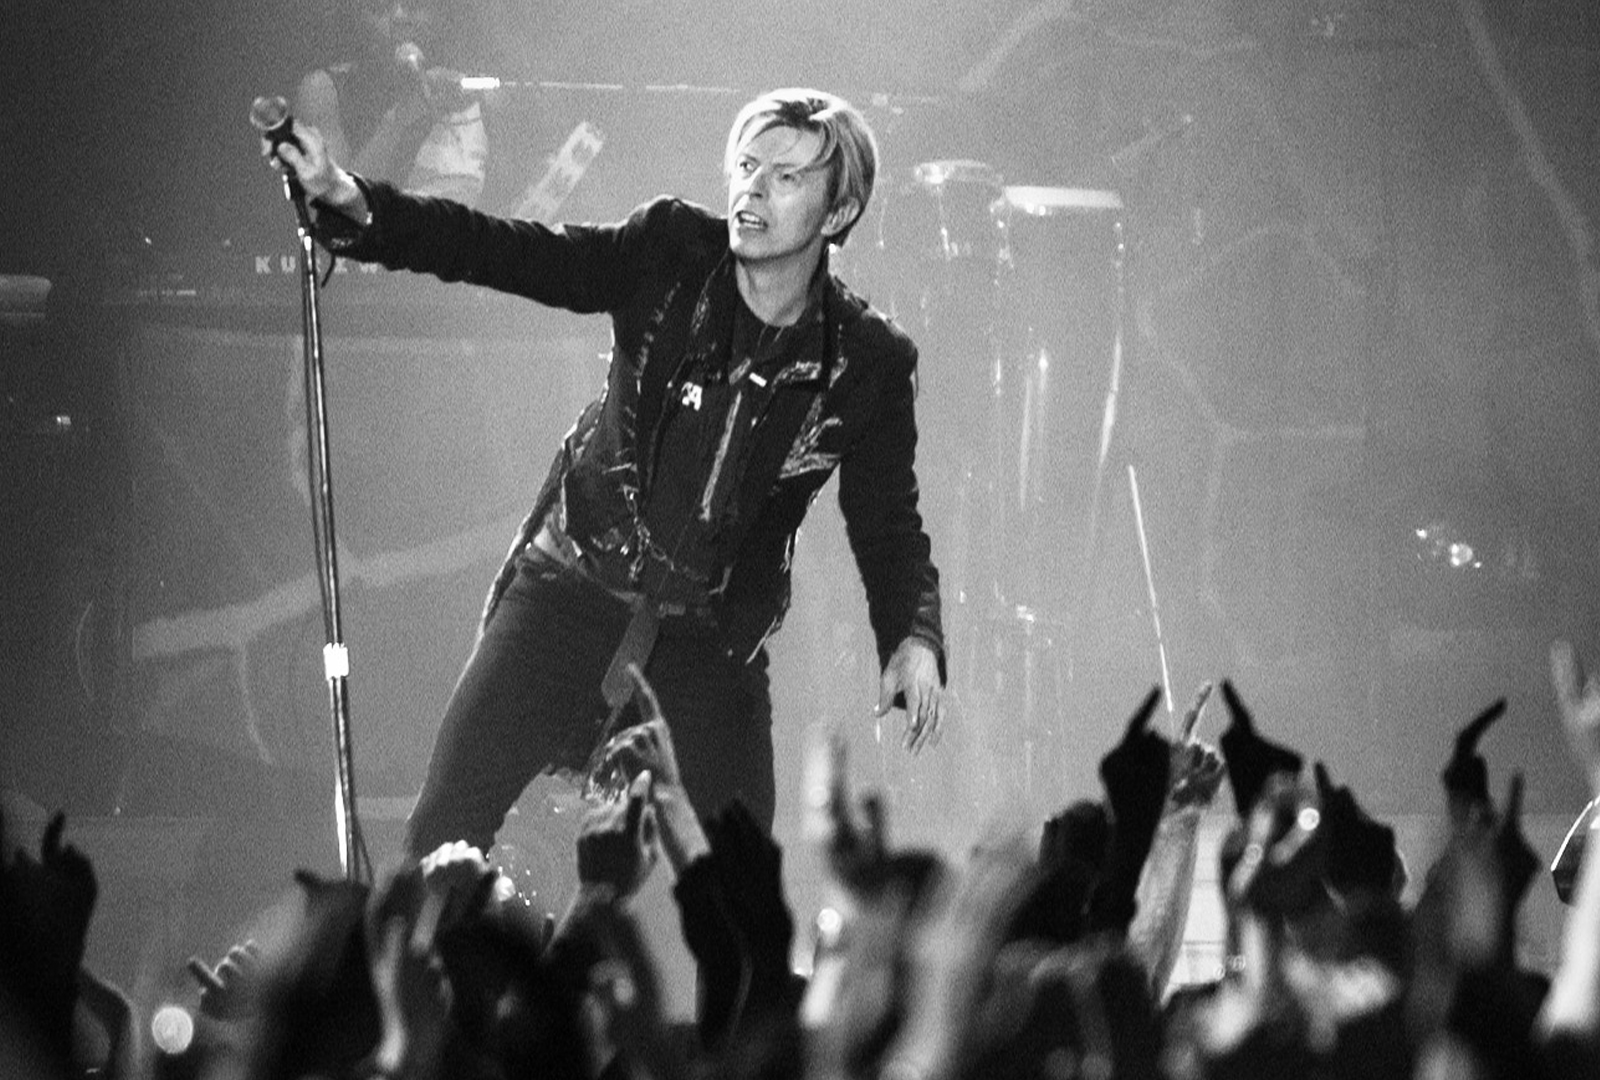 David Bowie's 75th birthday celebrated in Mary Anne Hobbs' new show